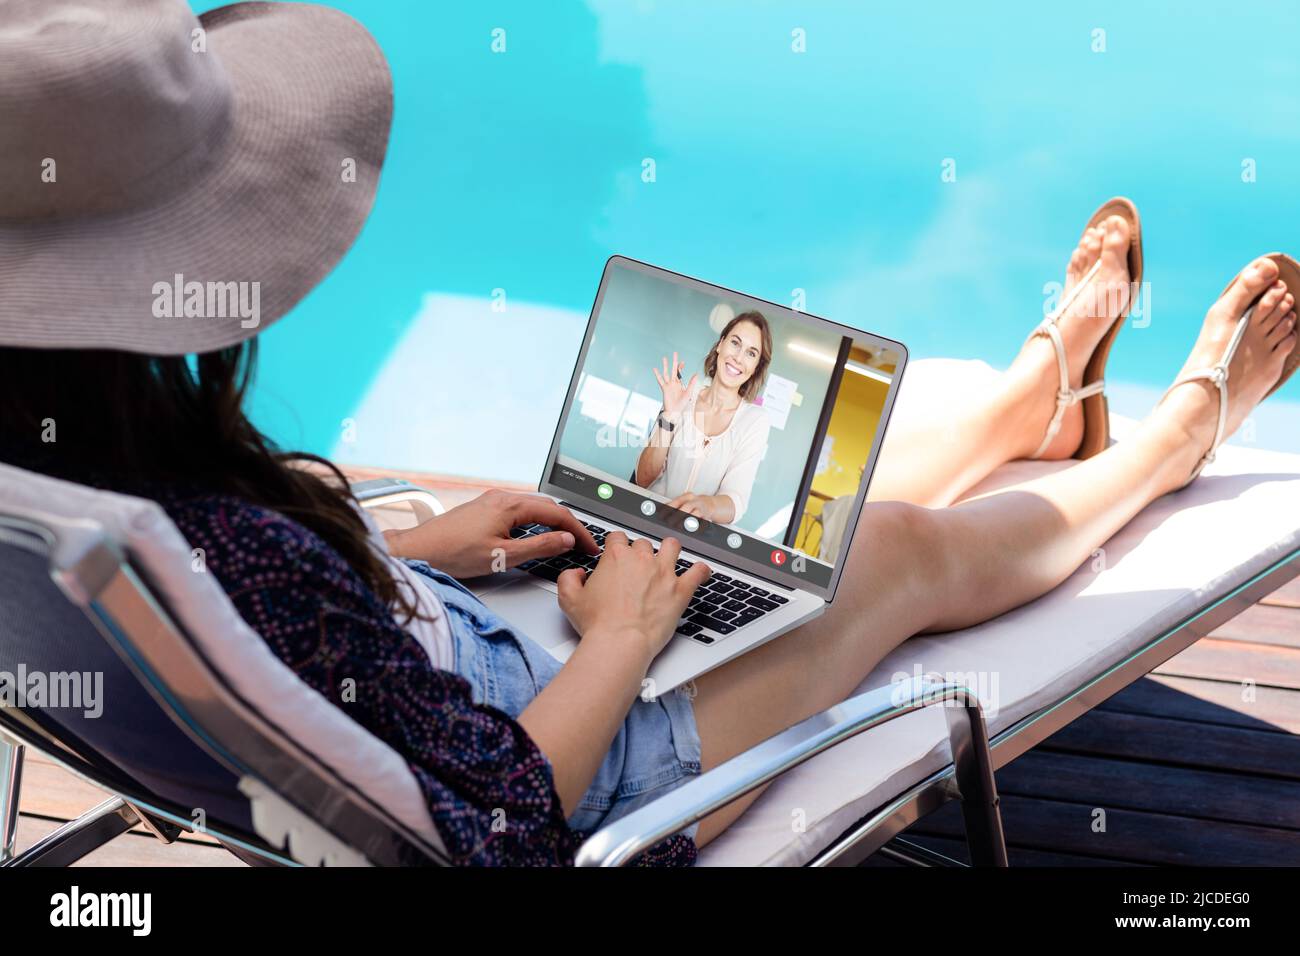 Caucasian businesswoman discussing with coworker over laptop while sitting at poolside on vacation Stock Photo